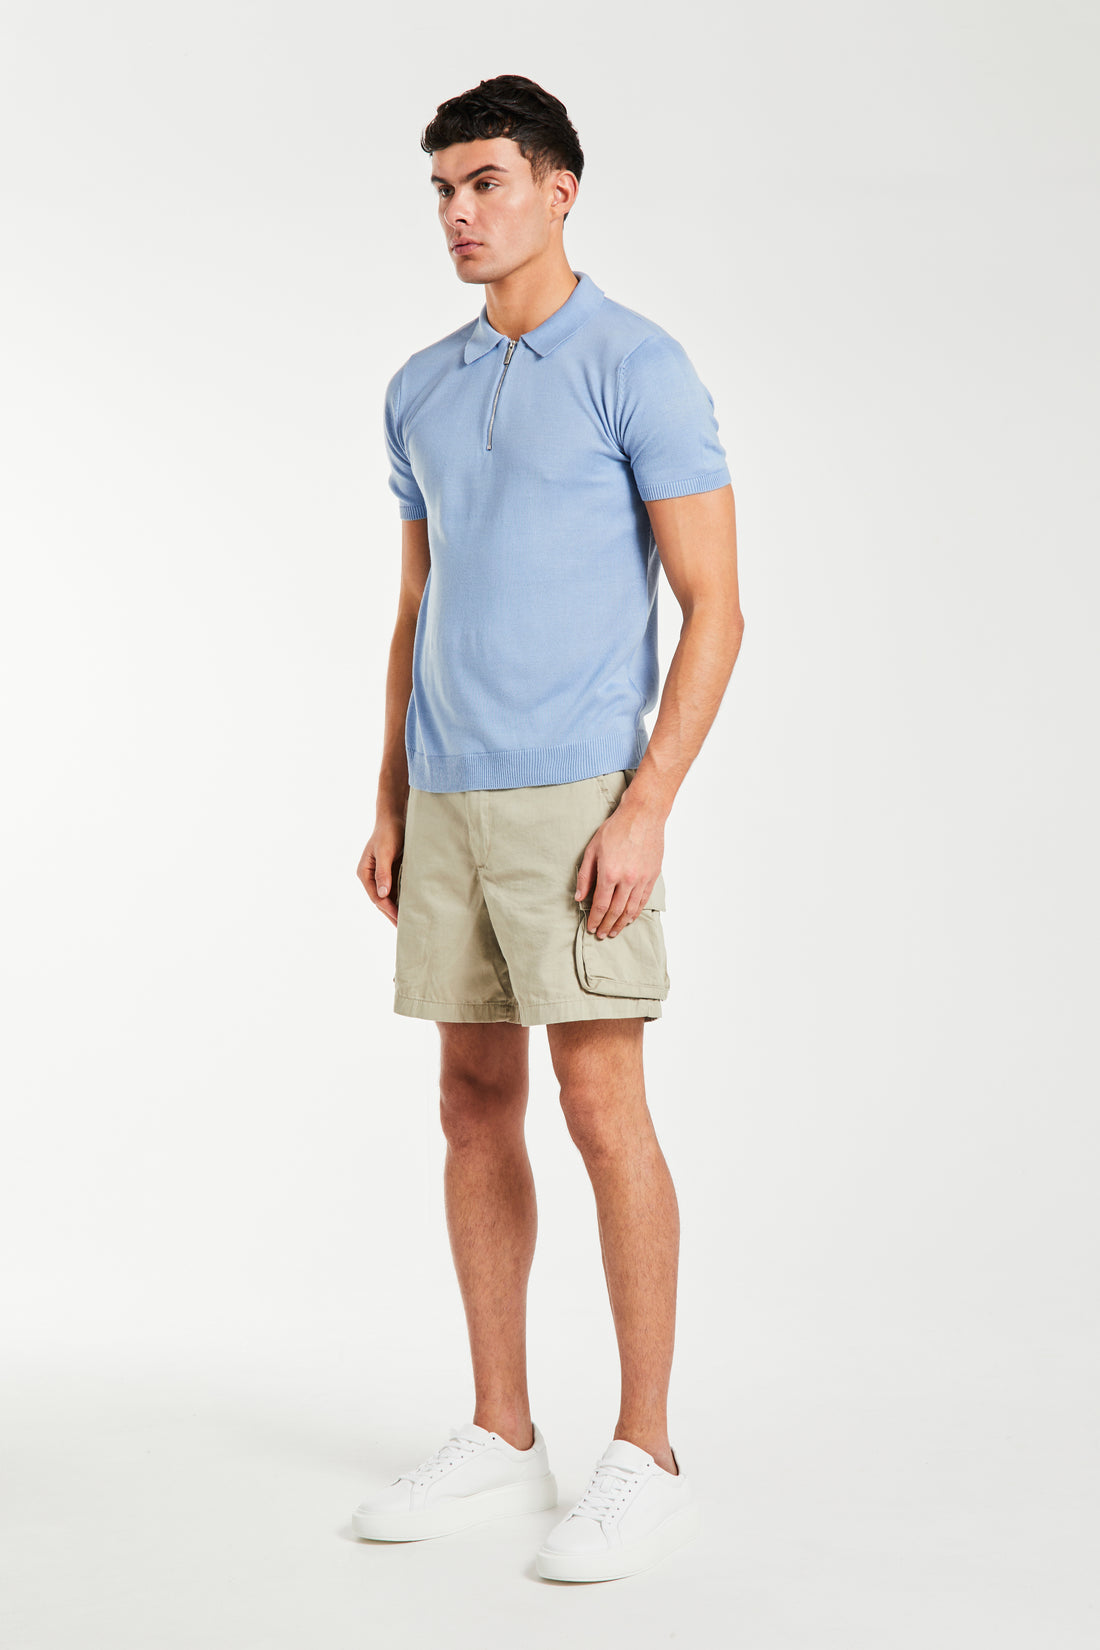 Men's zip knitted polo in blue with shorts